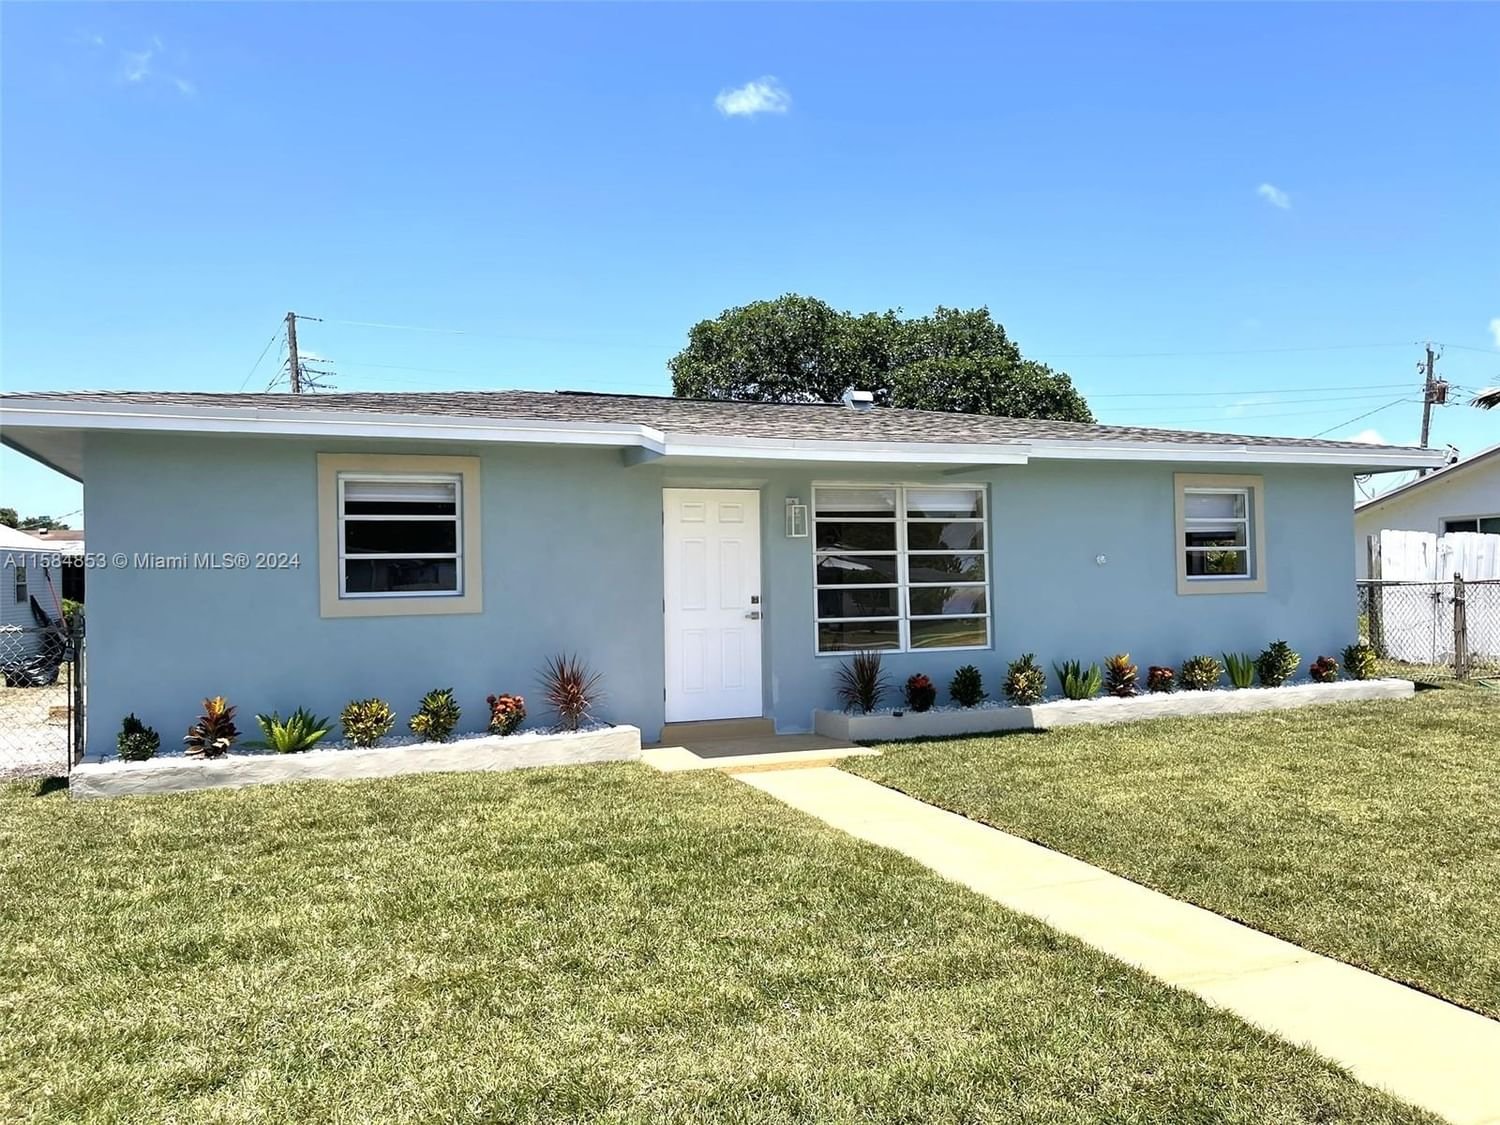 Real estate property located at 6869 22nd St, Broward County, WYN HOMESITES NO 3, Miramar, FL